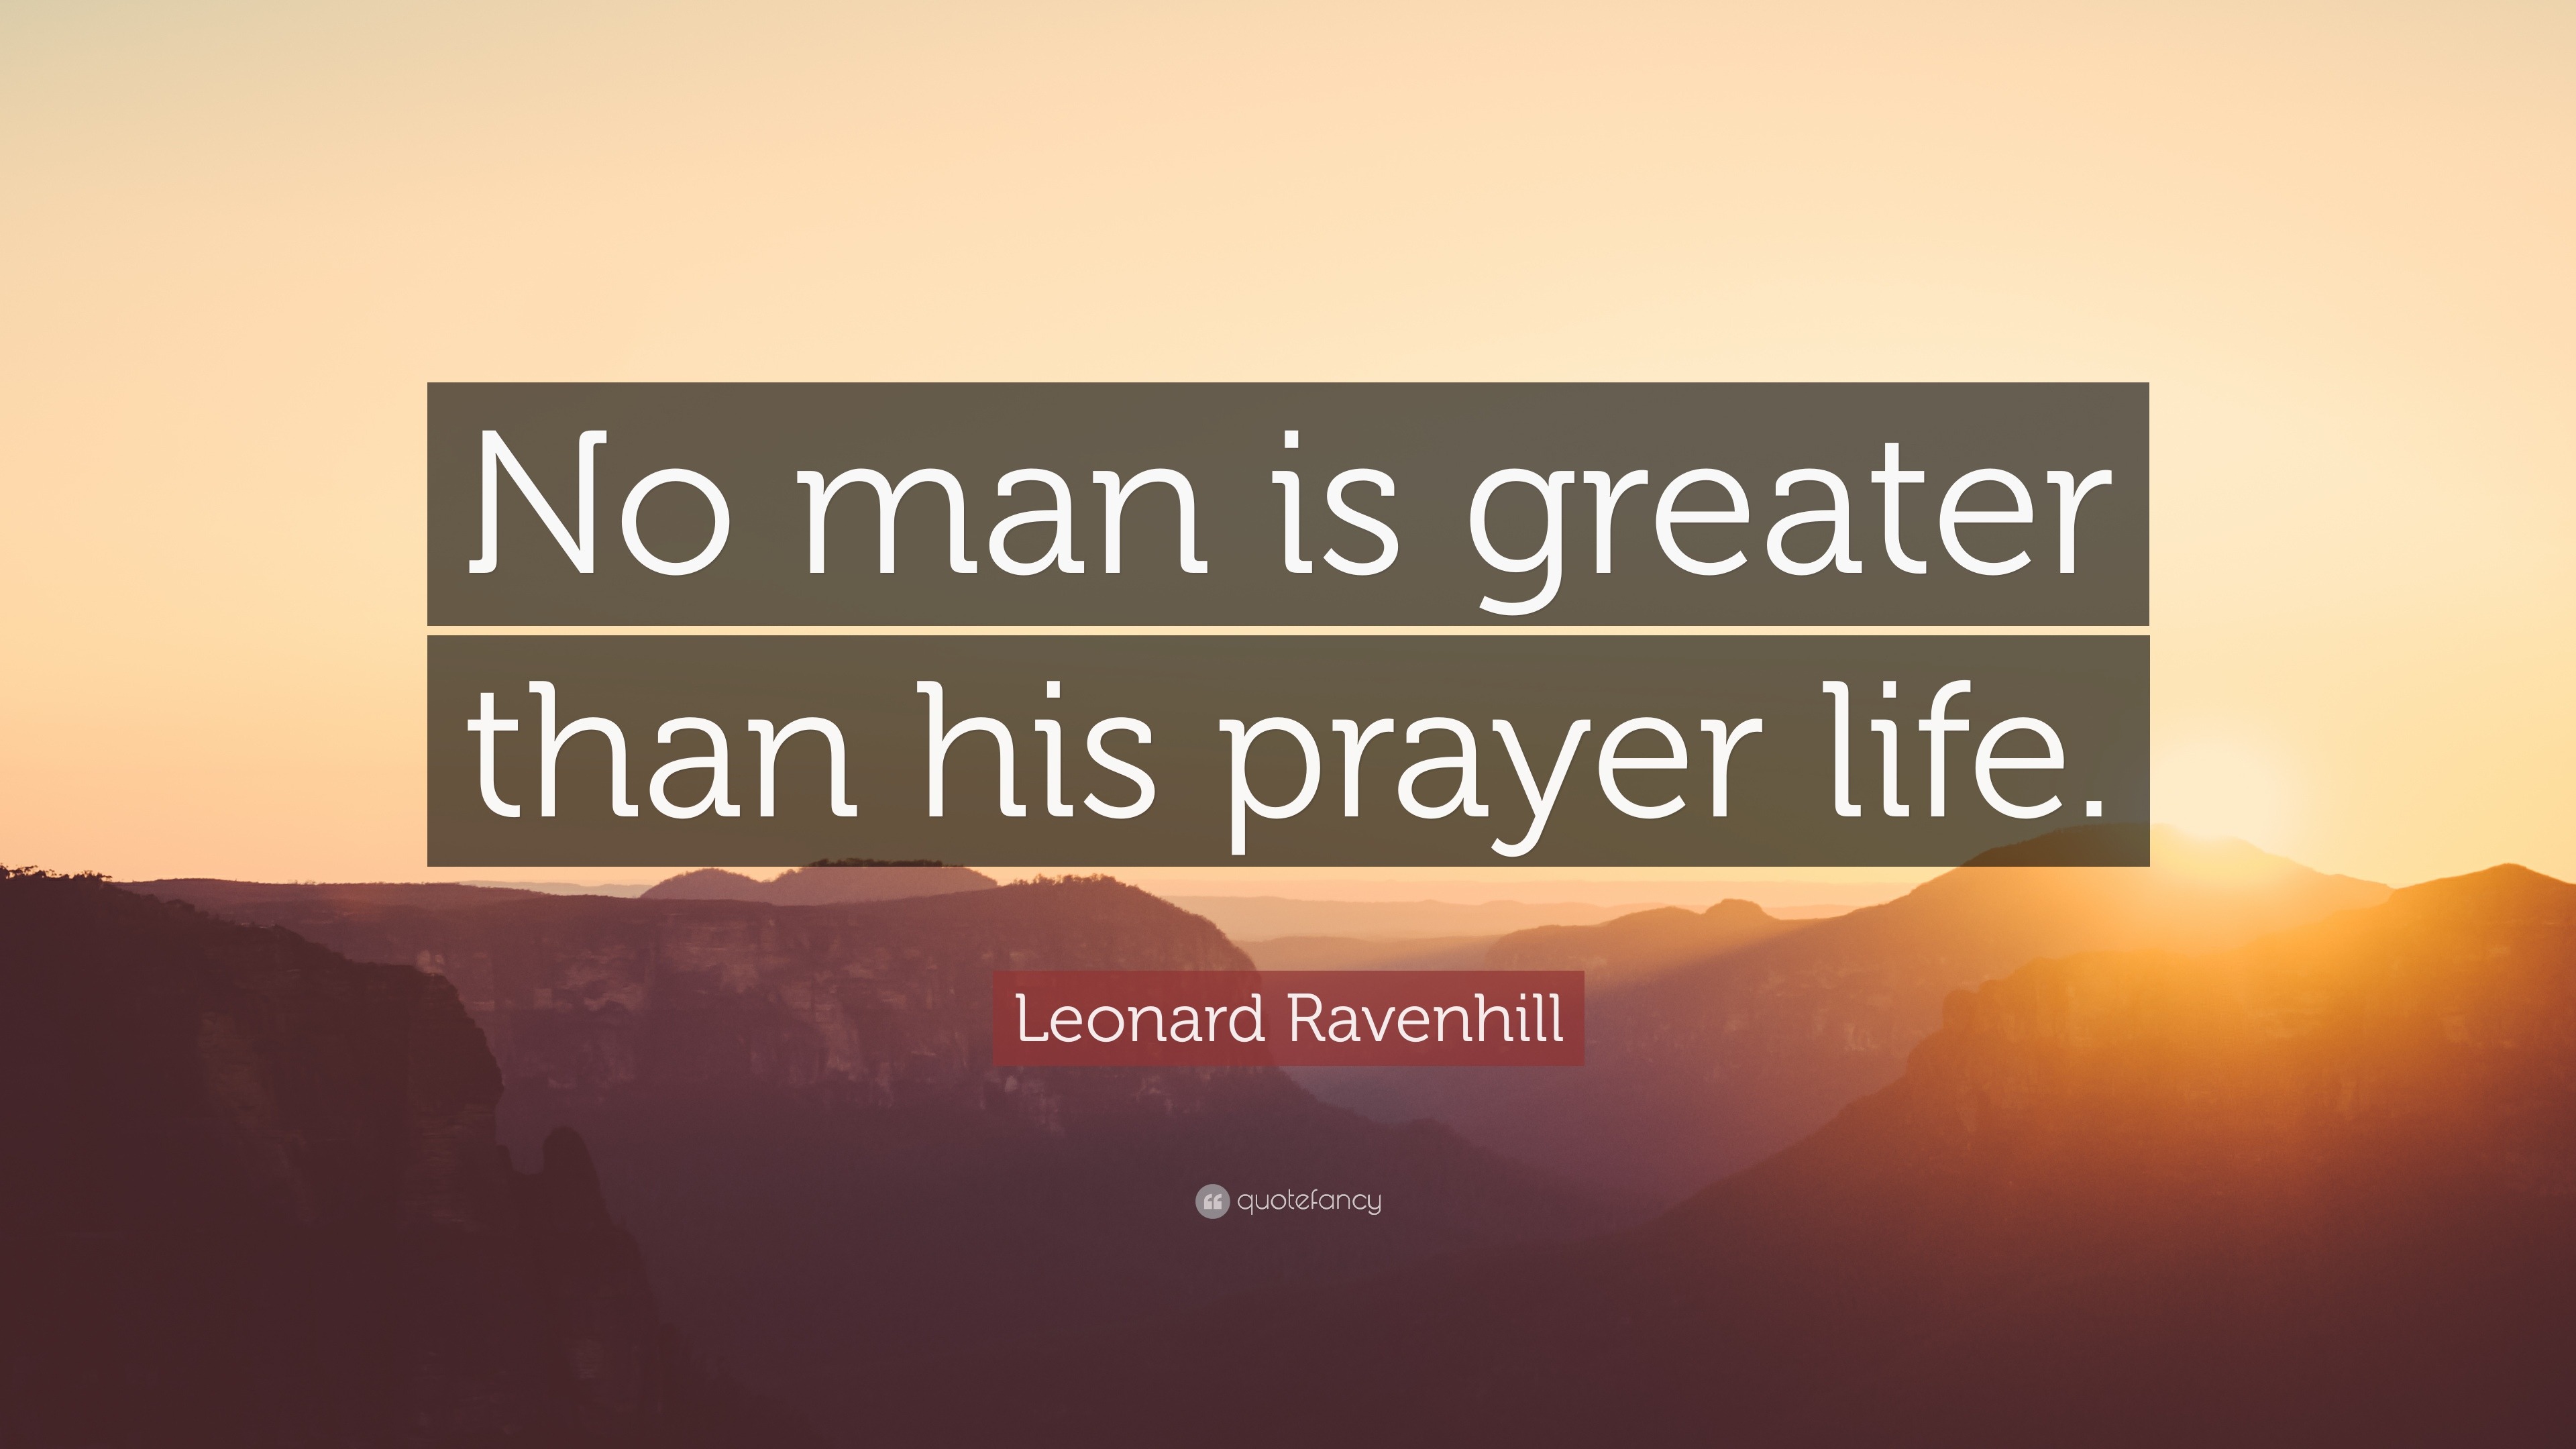 Leonard Ravenhill Quote: “No man is greater than his prayer life.” (17